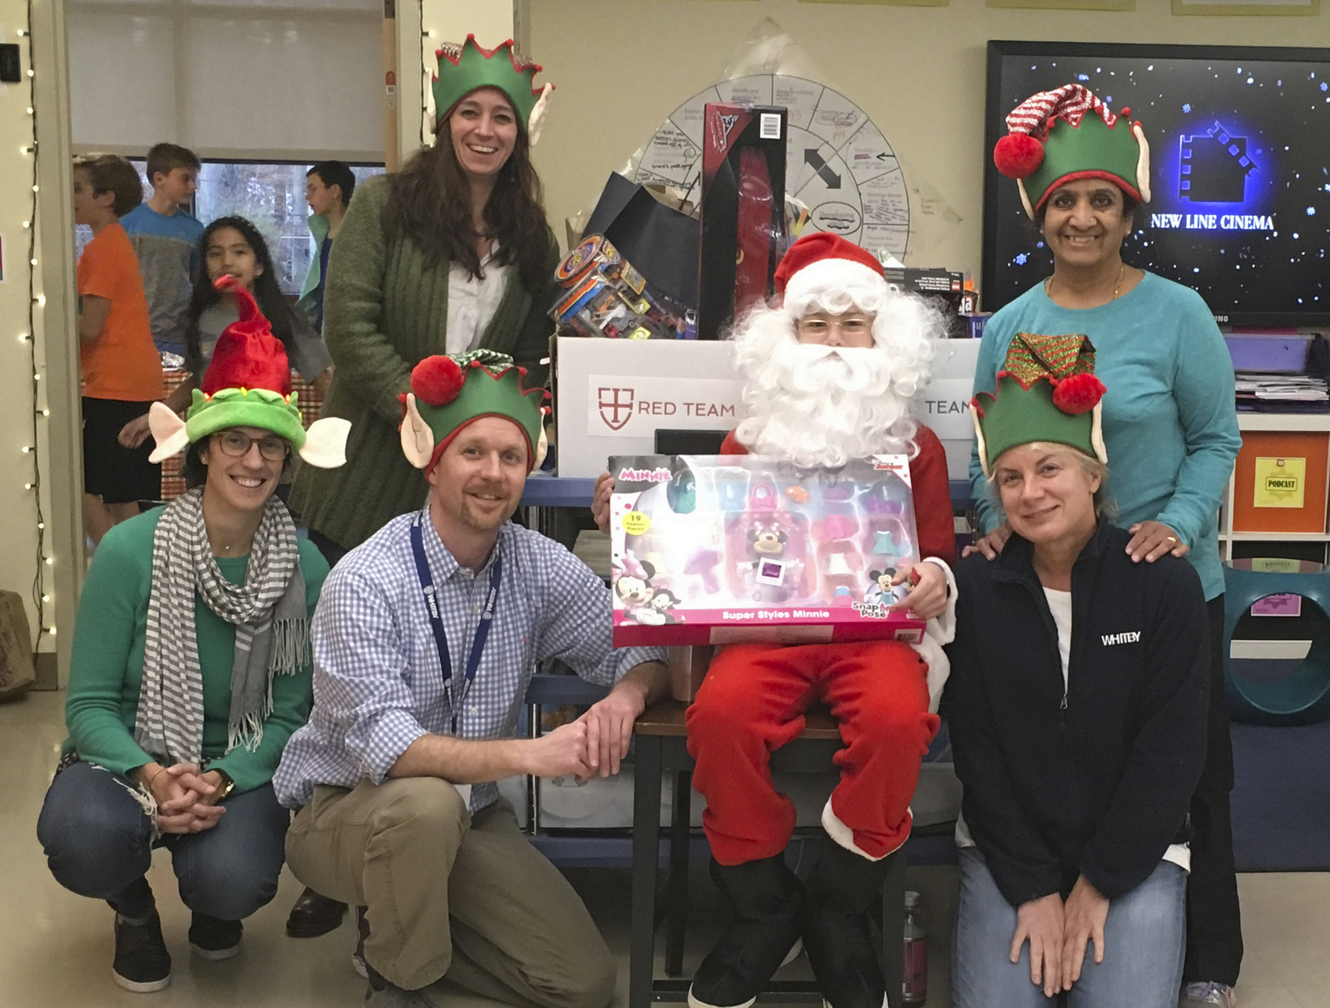 Upper School teachers and Santa collect toys at The Elf Toy Drive. Front row, from left: Lindsay Sudeikis, Phil Lohmeyer, Santa (6th grader George Markov), Annette Iverson. Back row, from left: Alicia Miller, Padma Iyler. contributed photo